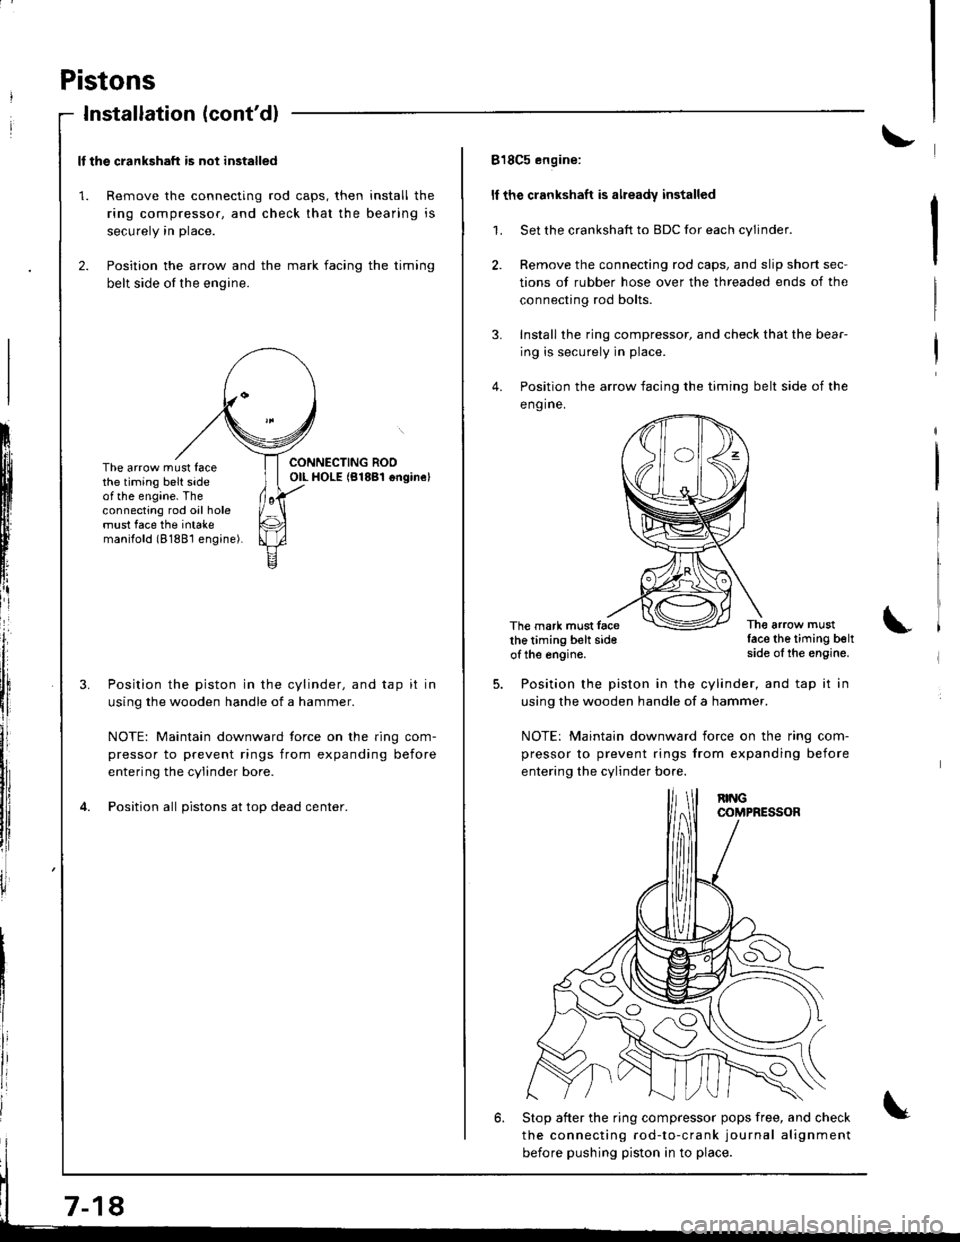 HONDA INTEGRA 1998 4.G Workshop Manual I
i
Pistons
Installation (contdl
ll the crankshaft is not installed
1. Remove the connecting rod caps, then install the
ring compressor. and check that the bearing is
securely in place.
2. Position t